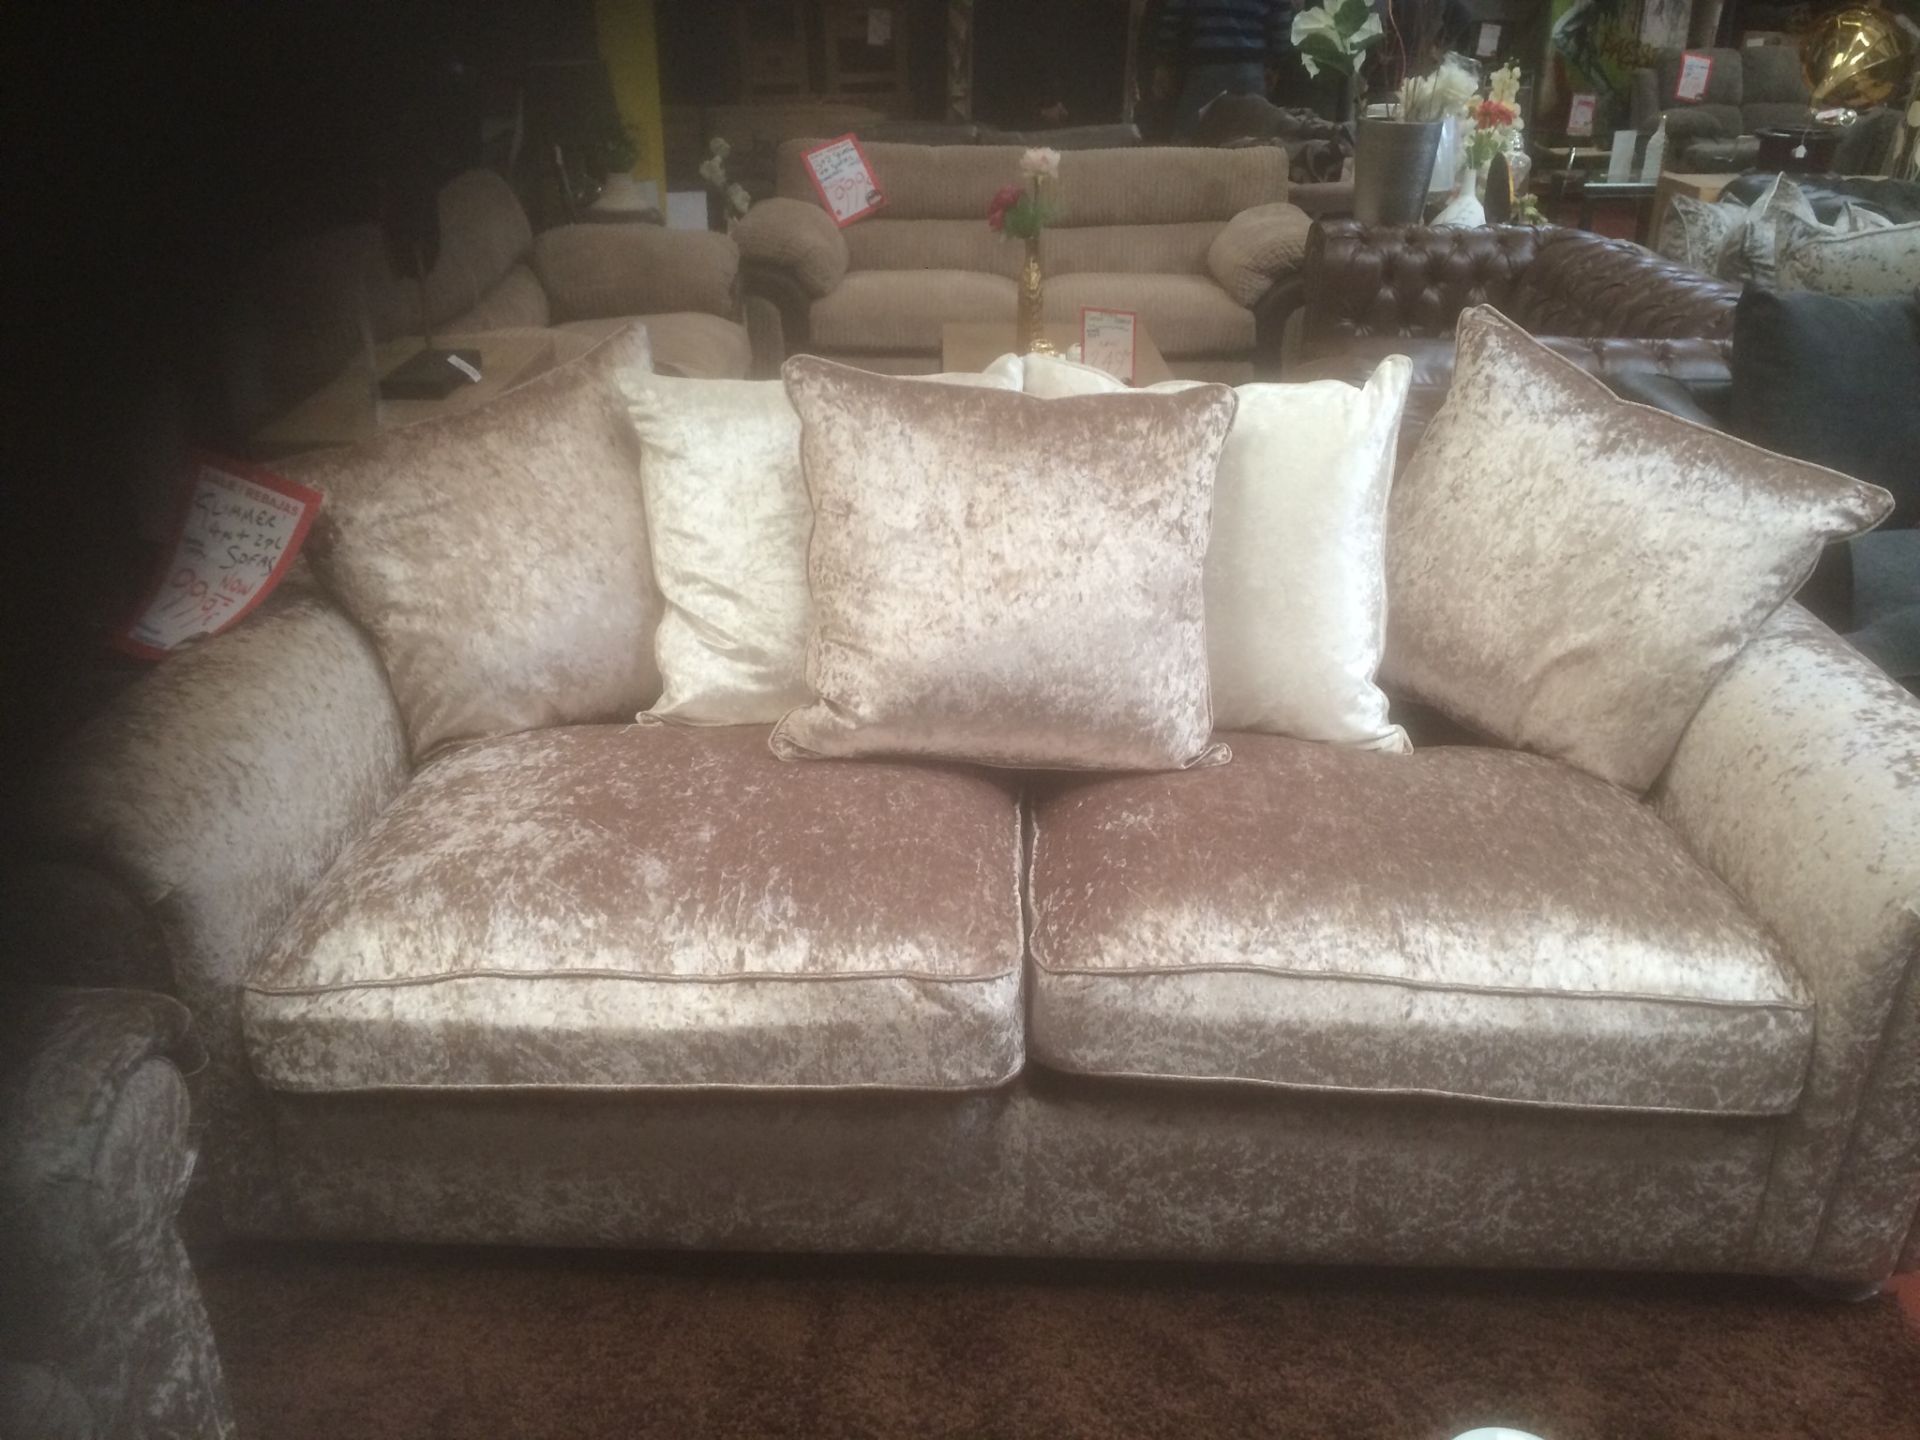 Scarpa deluxe 3 seater sofa in mink shimmer crushed velvet plus scarpa 2 seater sofa - Image 2 of 3